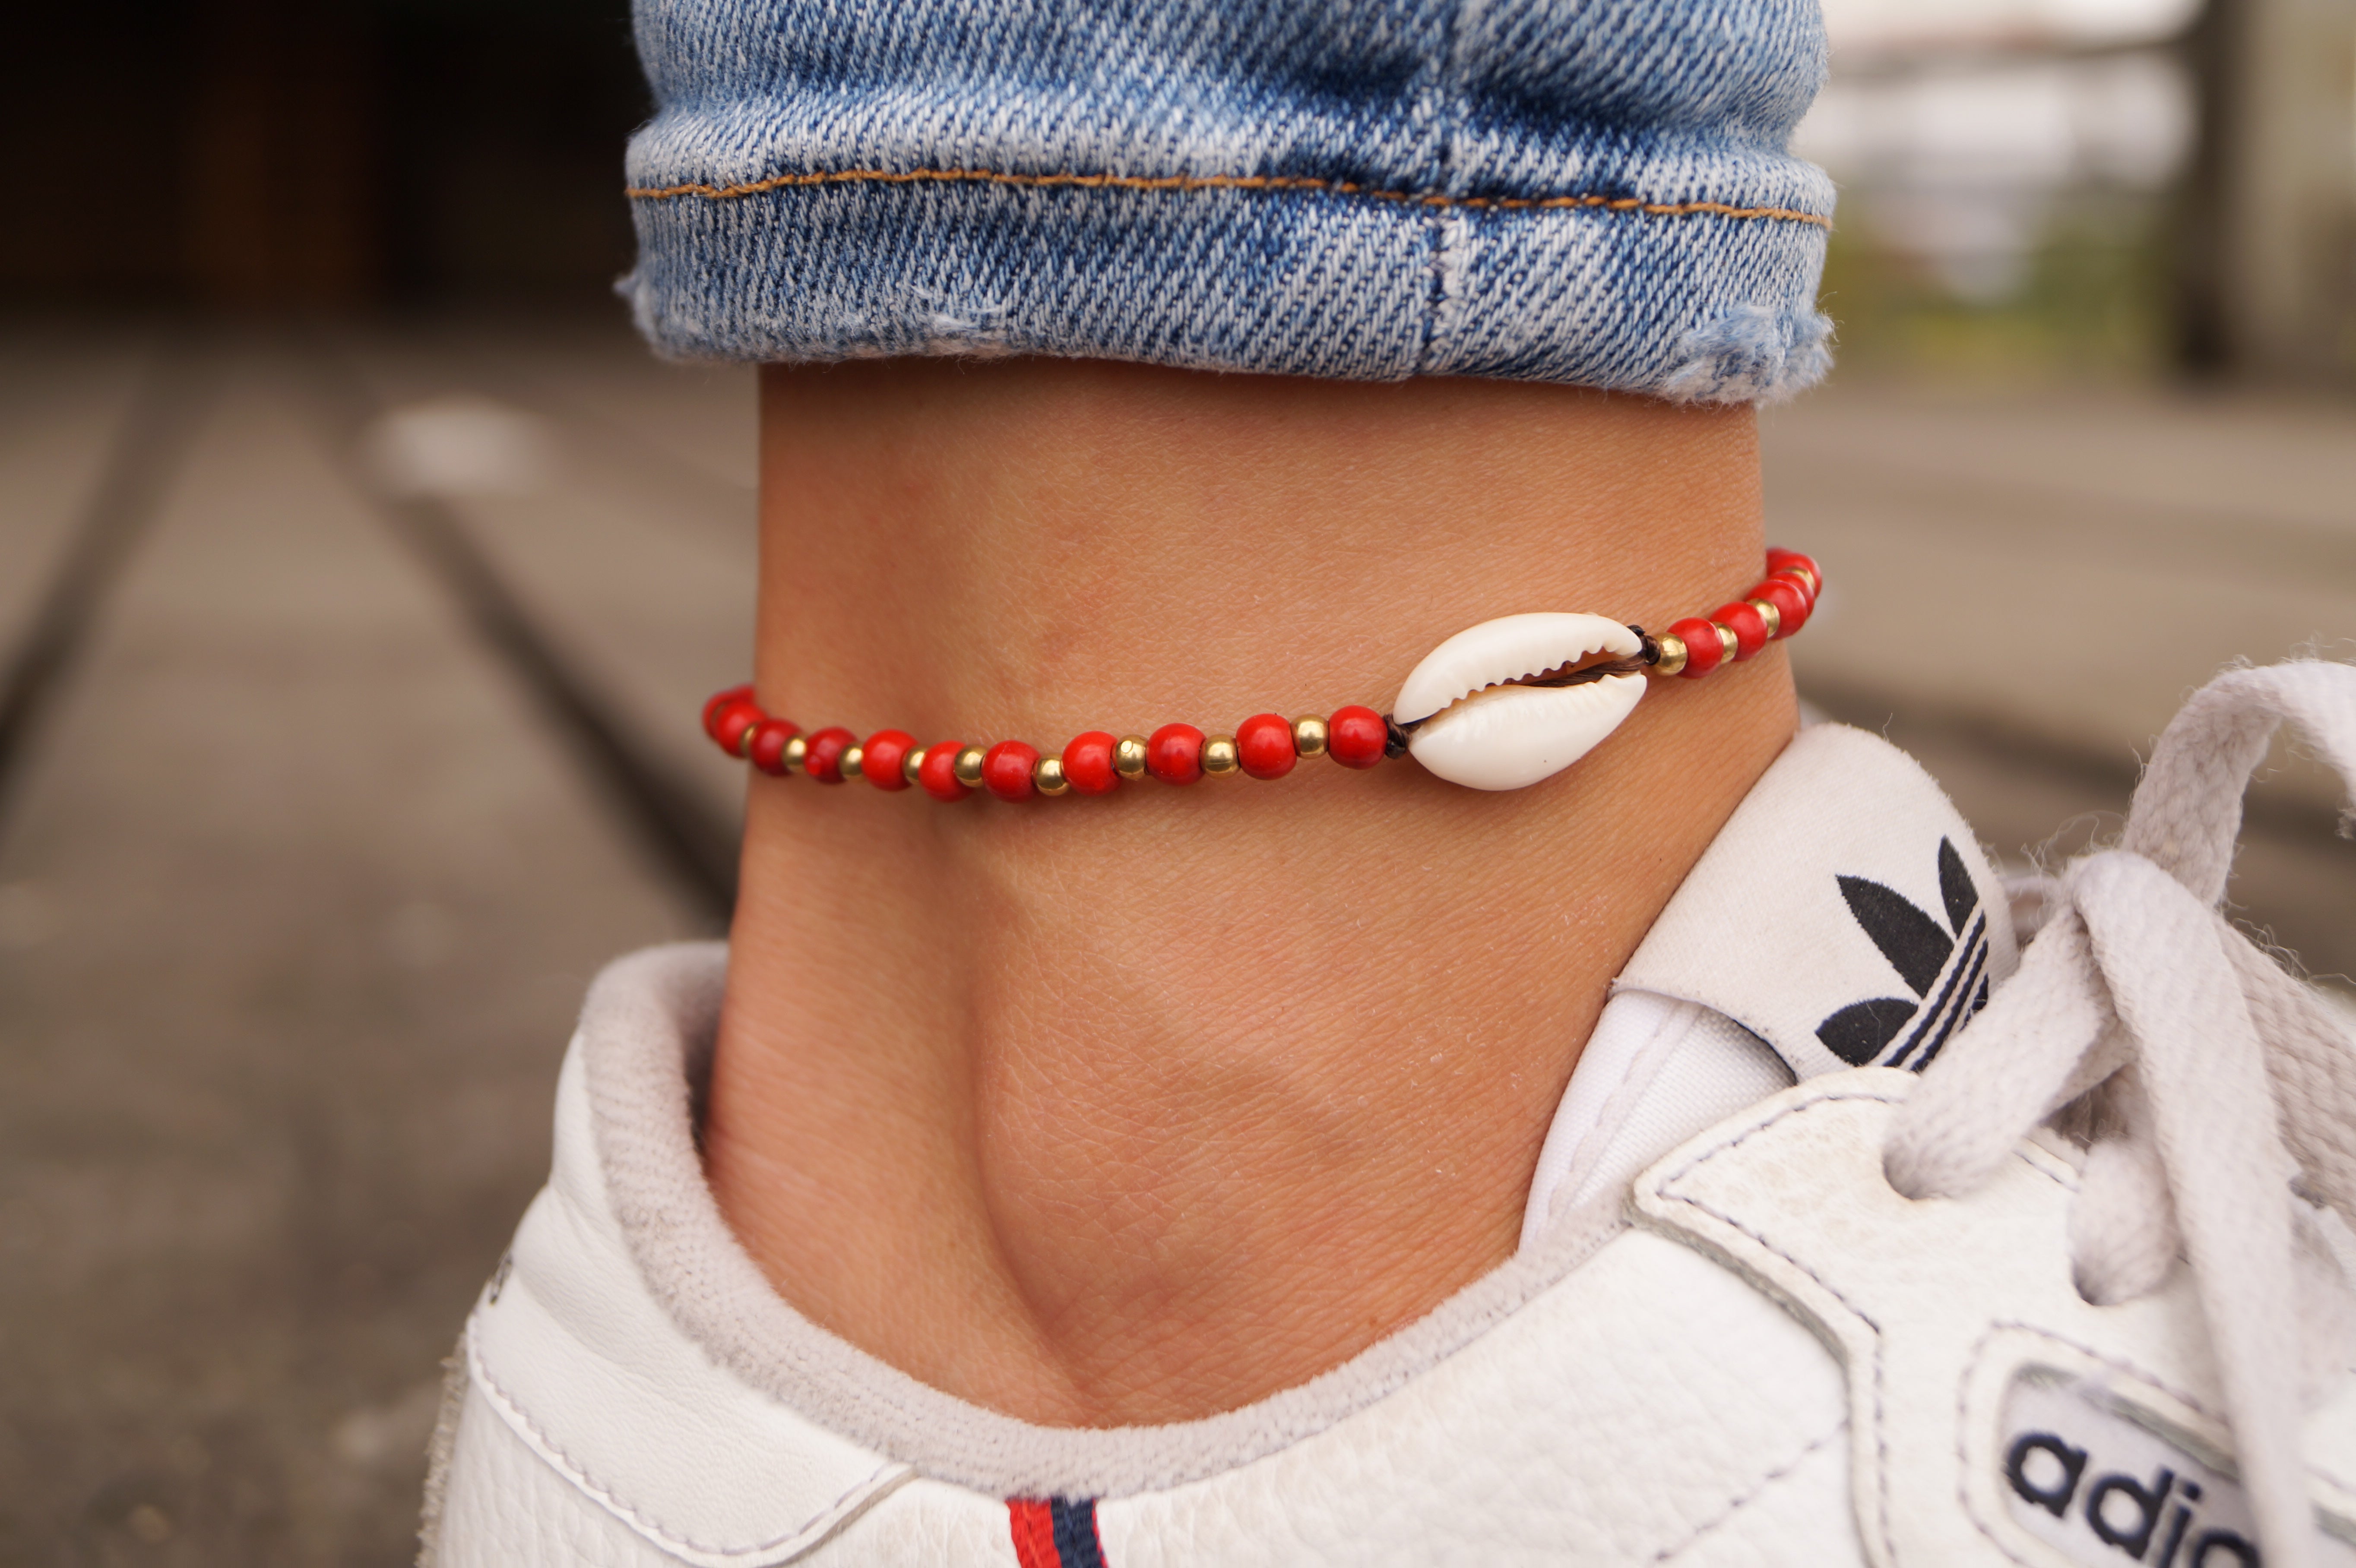 Goa Shell Anklet - Red Beads